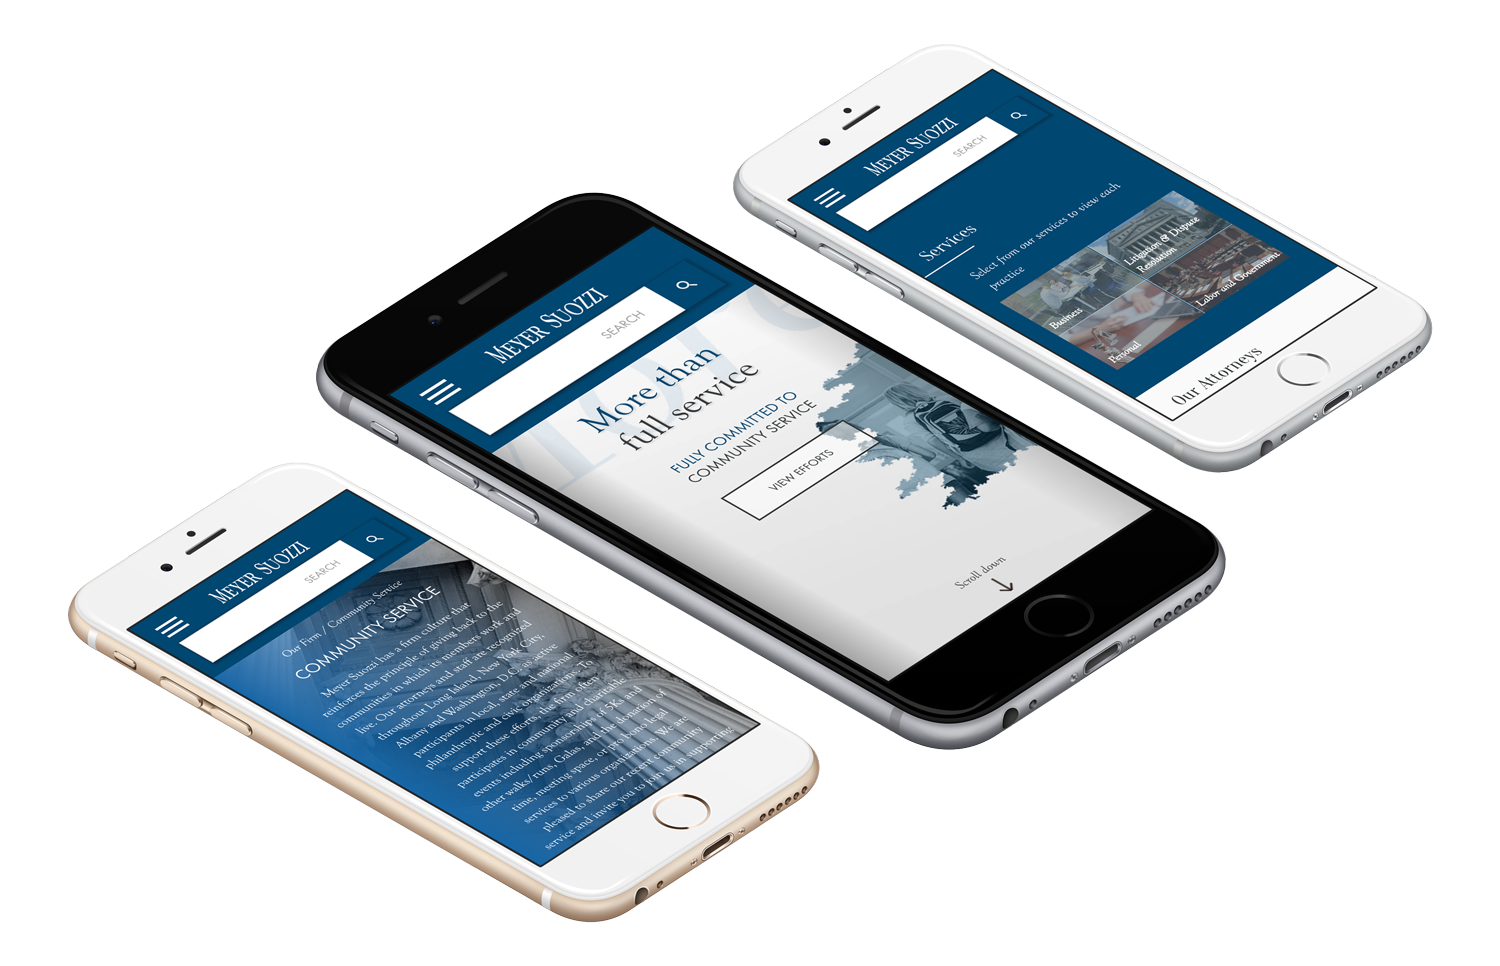 Meyer Suozzi - Law Firm Web Design & Marketing Strategy Project on mobile devices